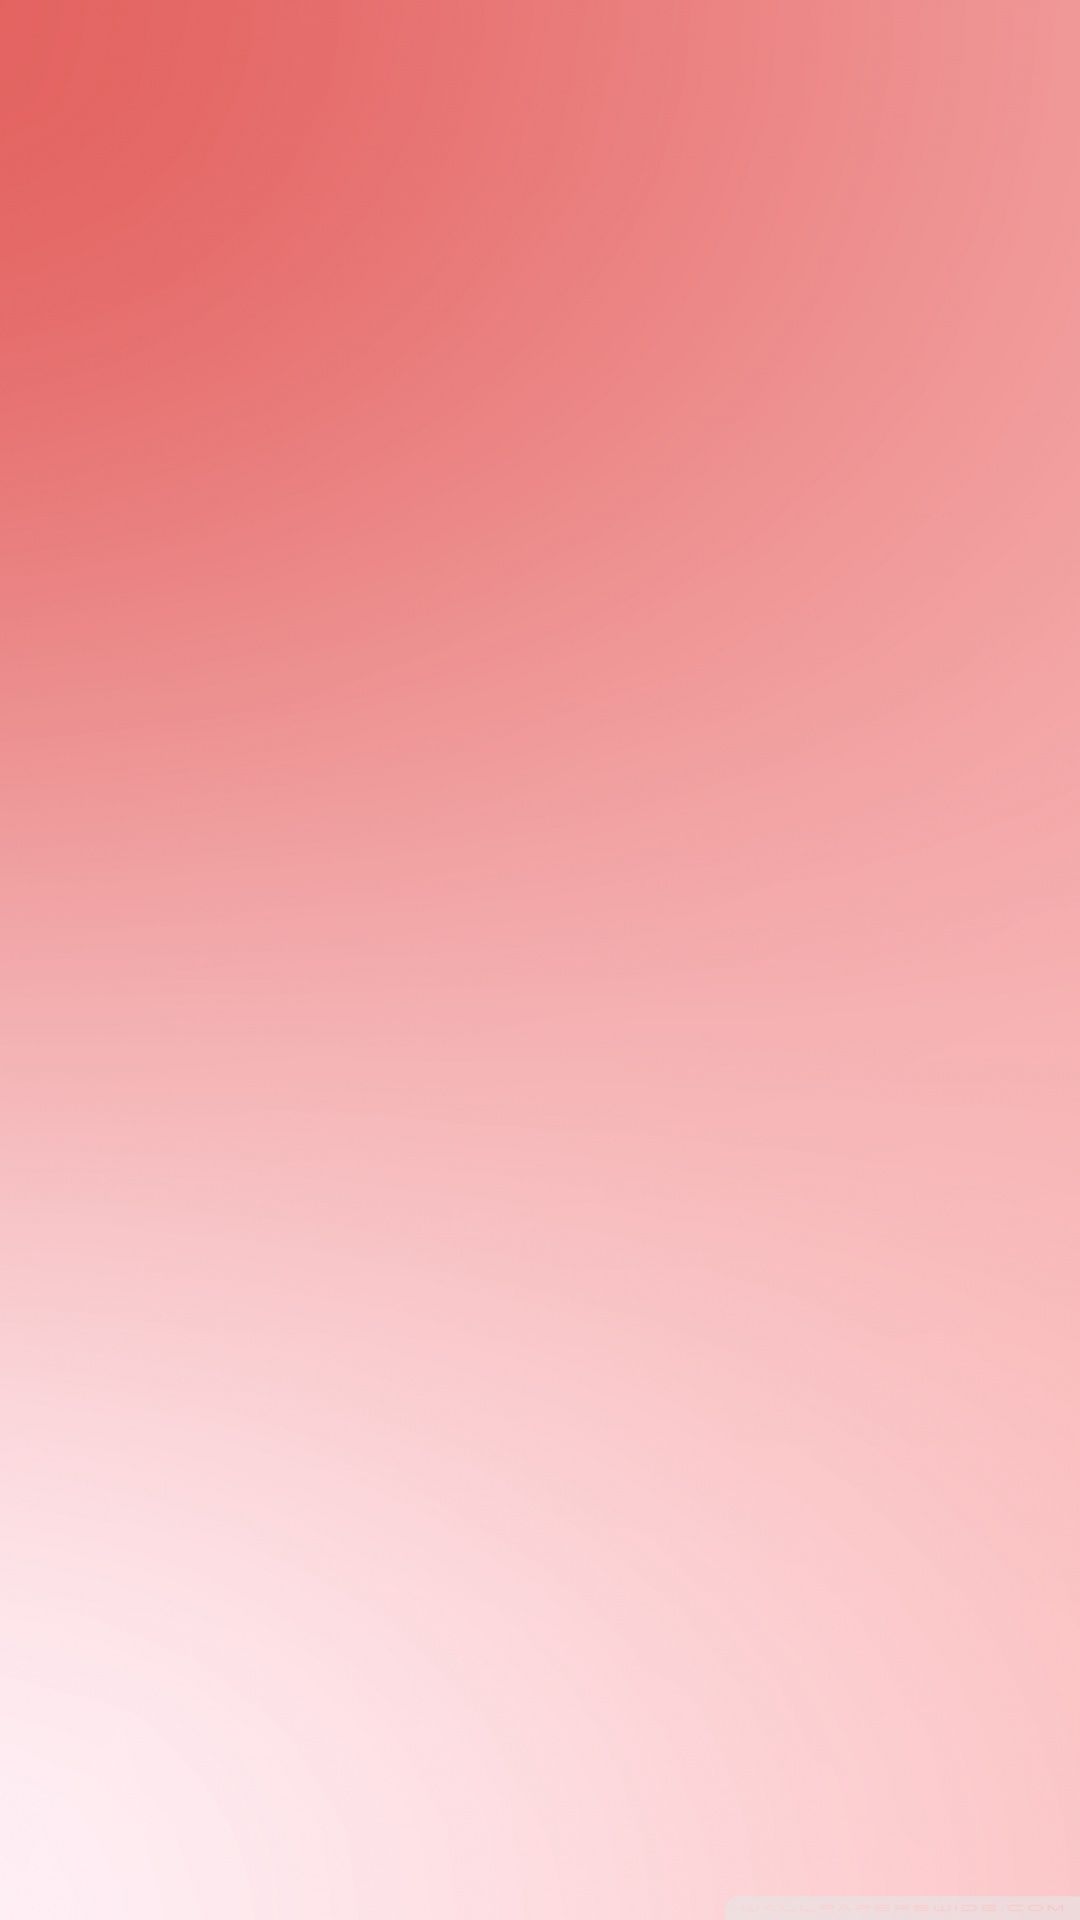 Pink Peach Gradient Backgrounds Ultra HD Desktop Backgrounds Wallpapers for : Multi Display, Dual Monitor : Tablet : Smartphone